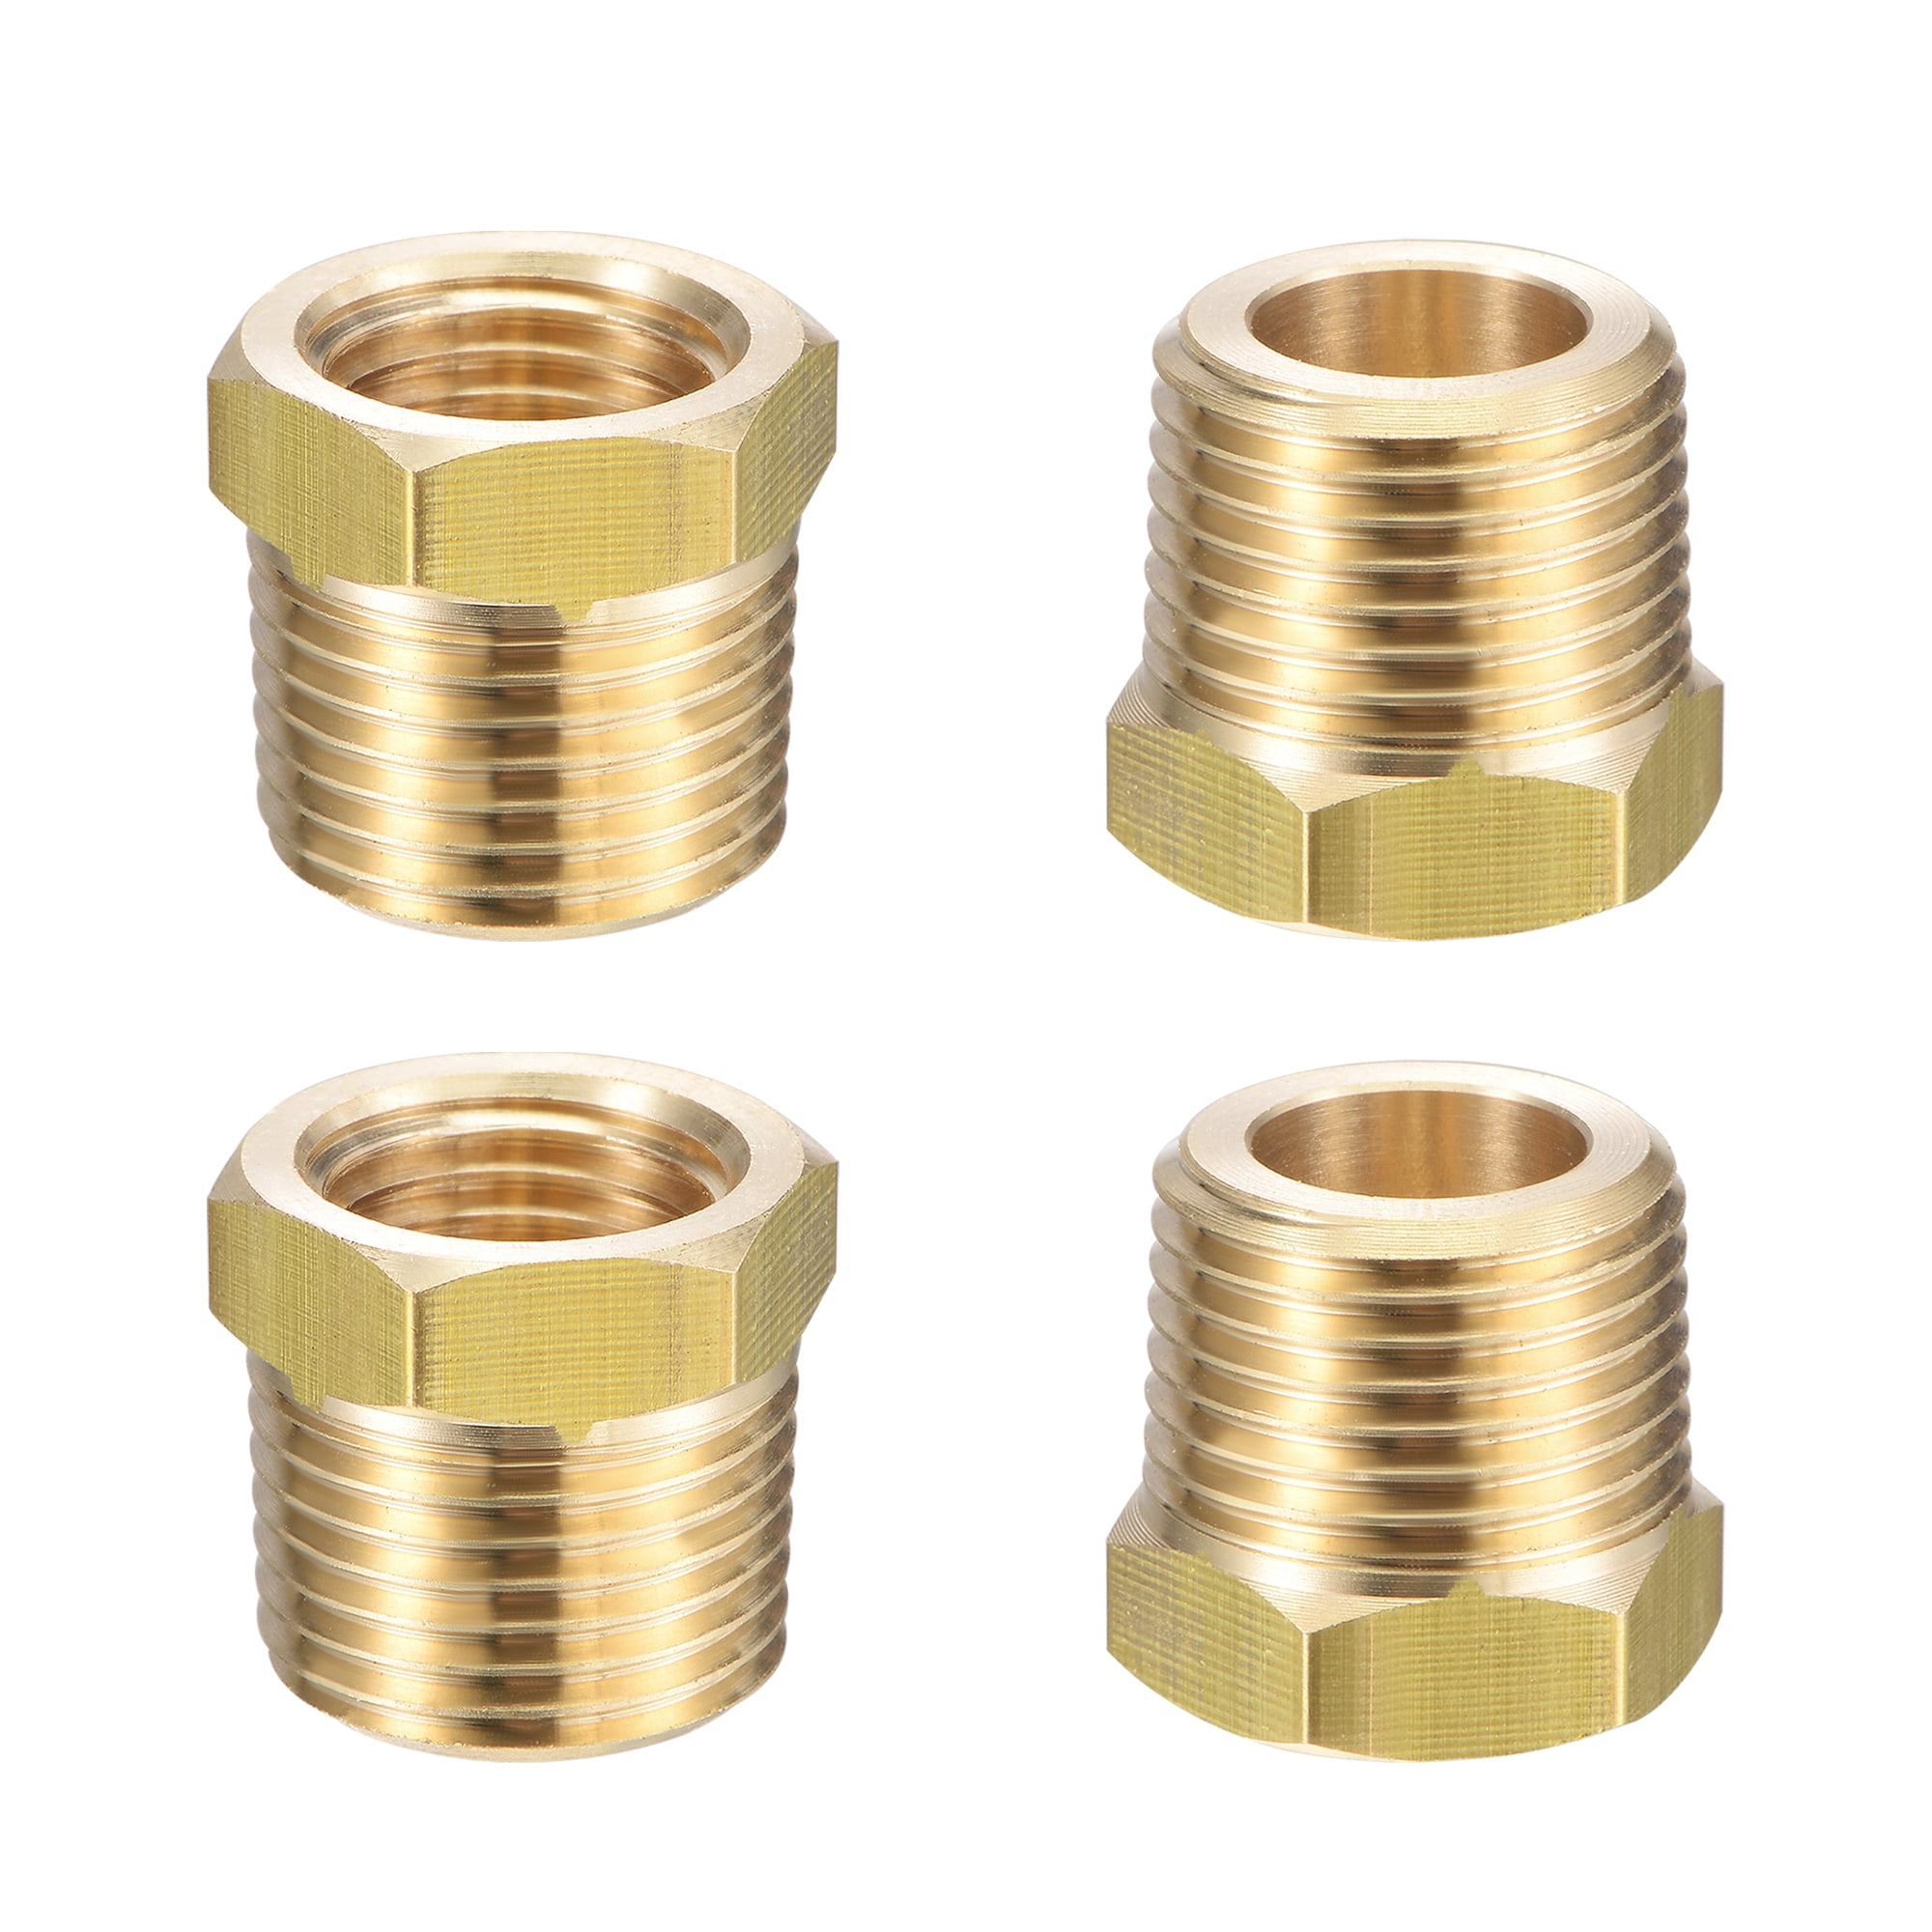 Solid Brass Hex Head Plug Adapter Fitting 1/4" Inch Male NPT Air Fuel Oil Water 